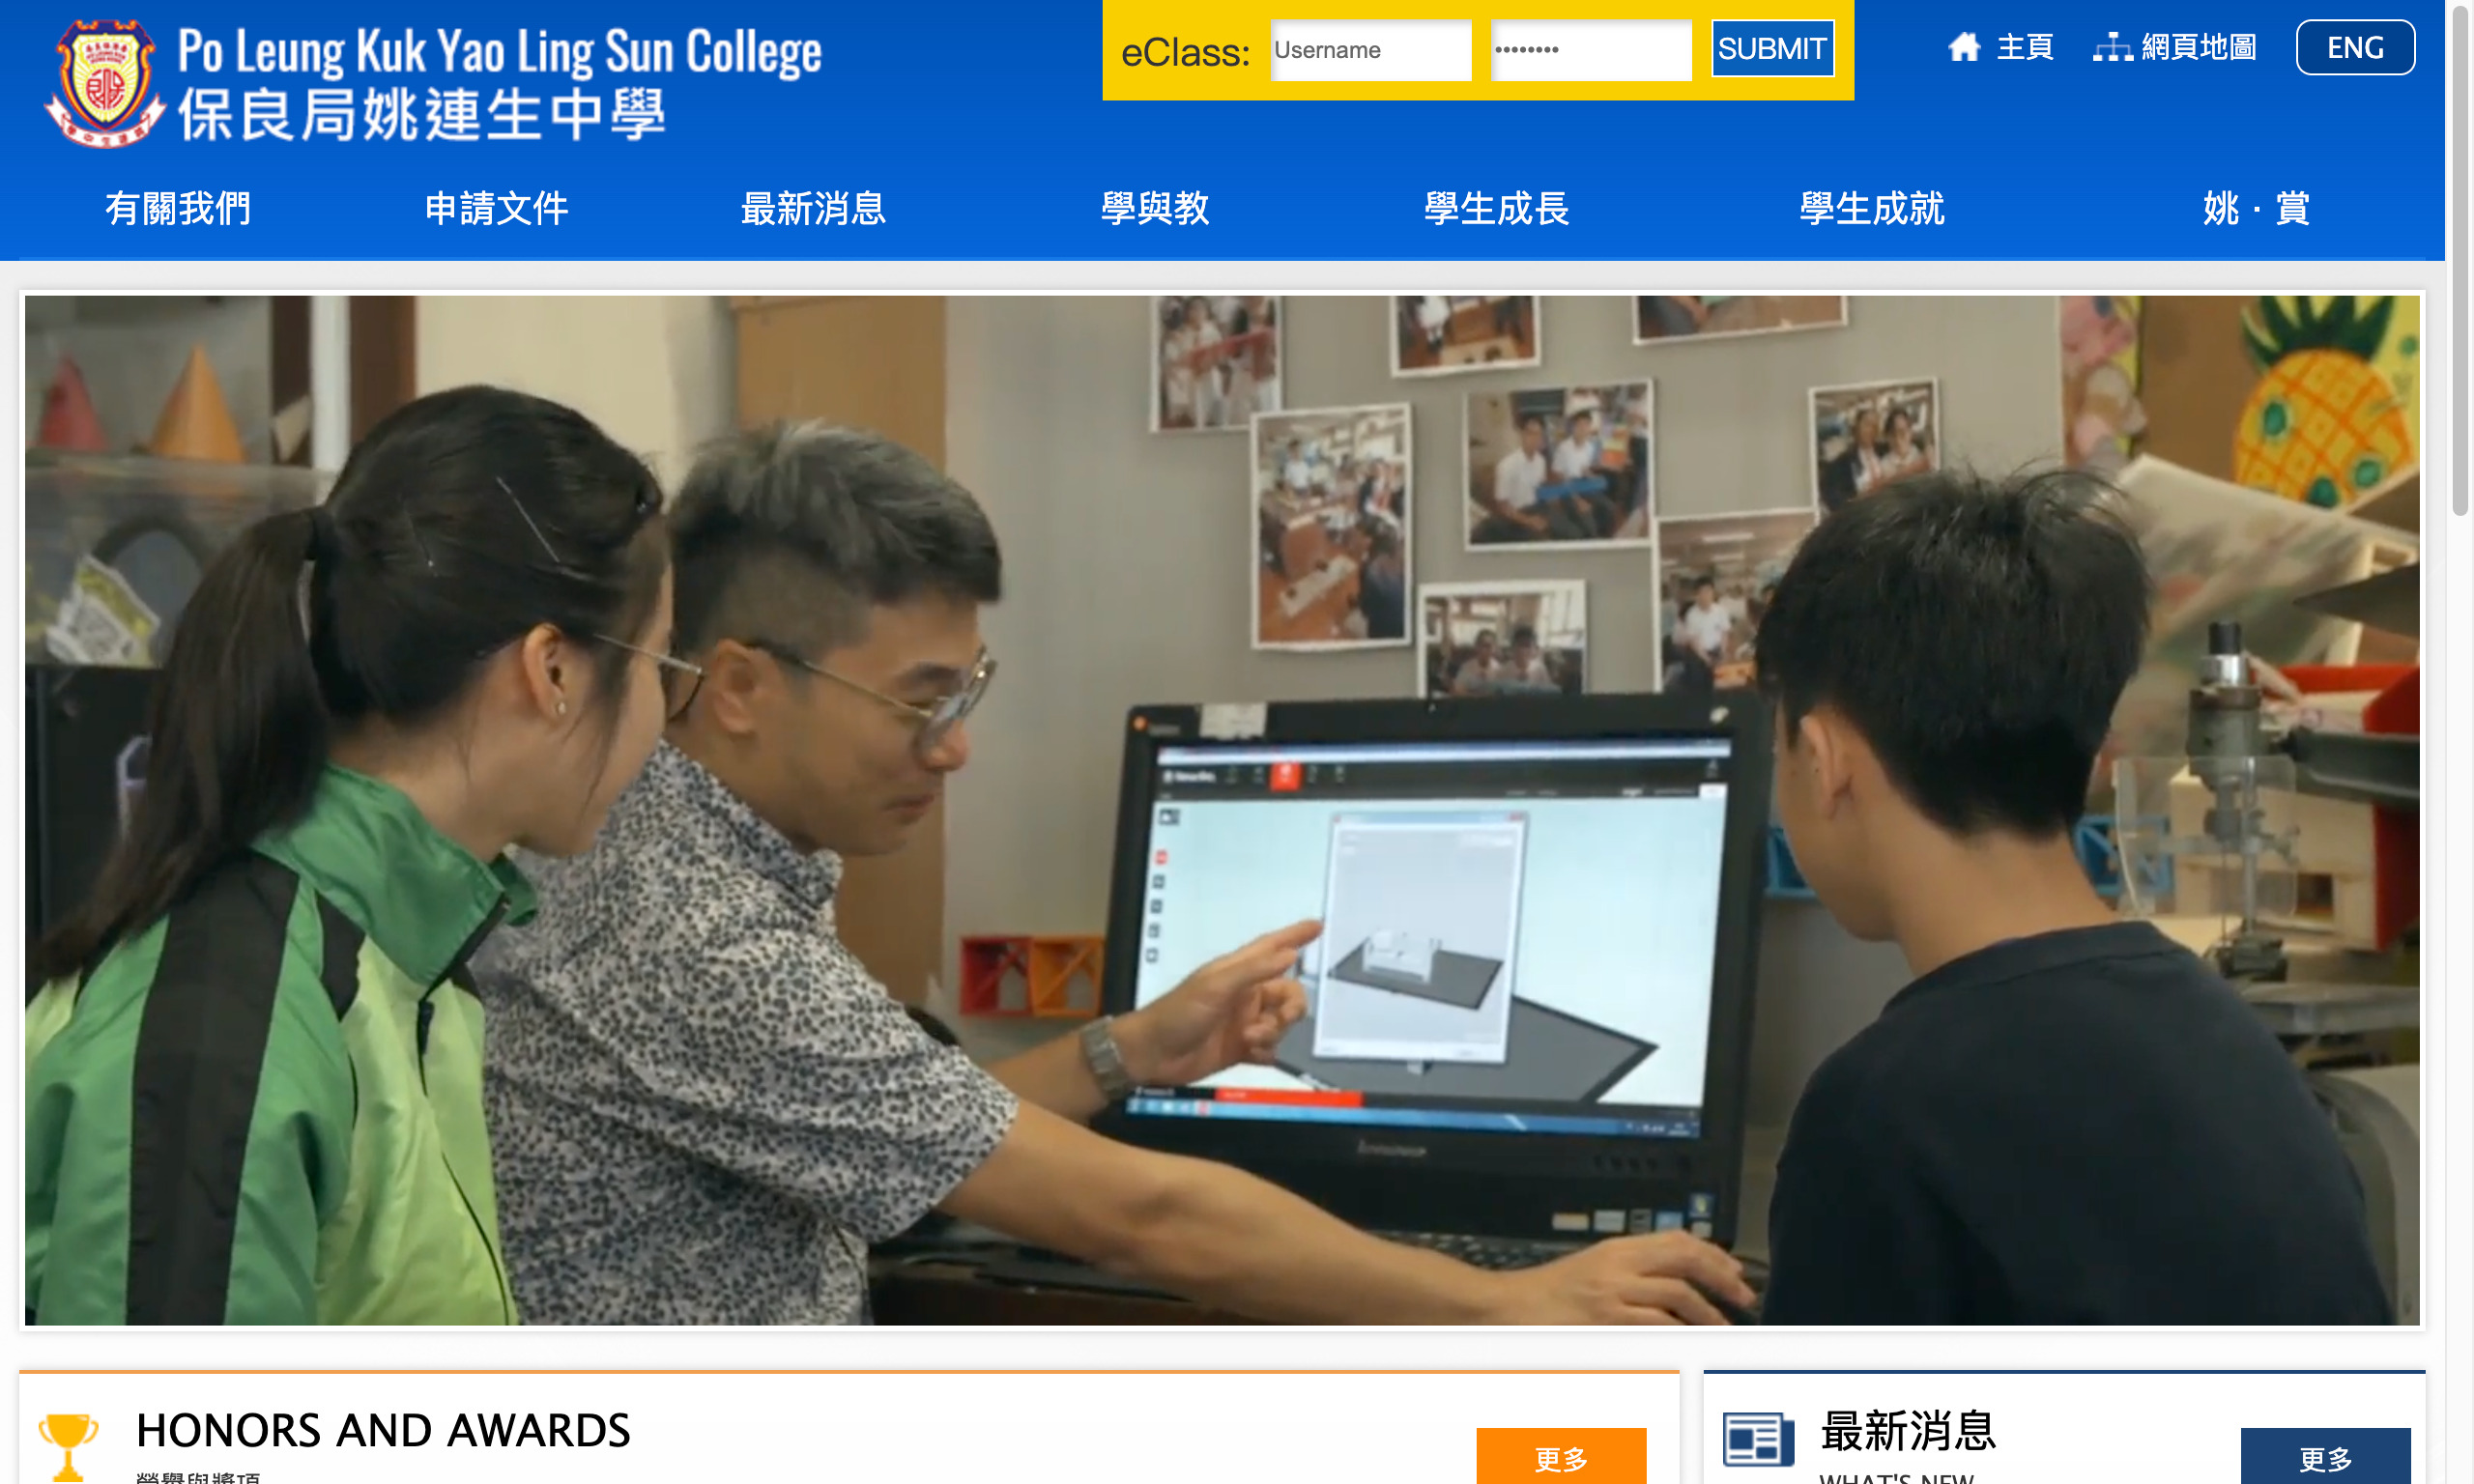 Screenshot of the Home Page of Po Leung Kuk Yao Ling Sun College